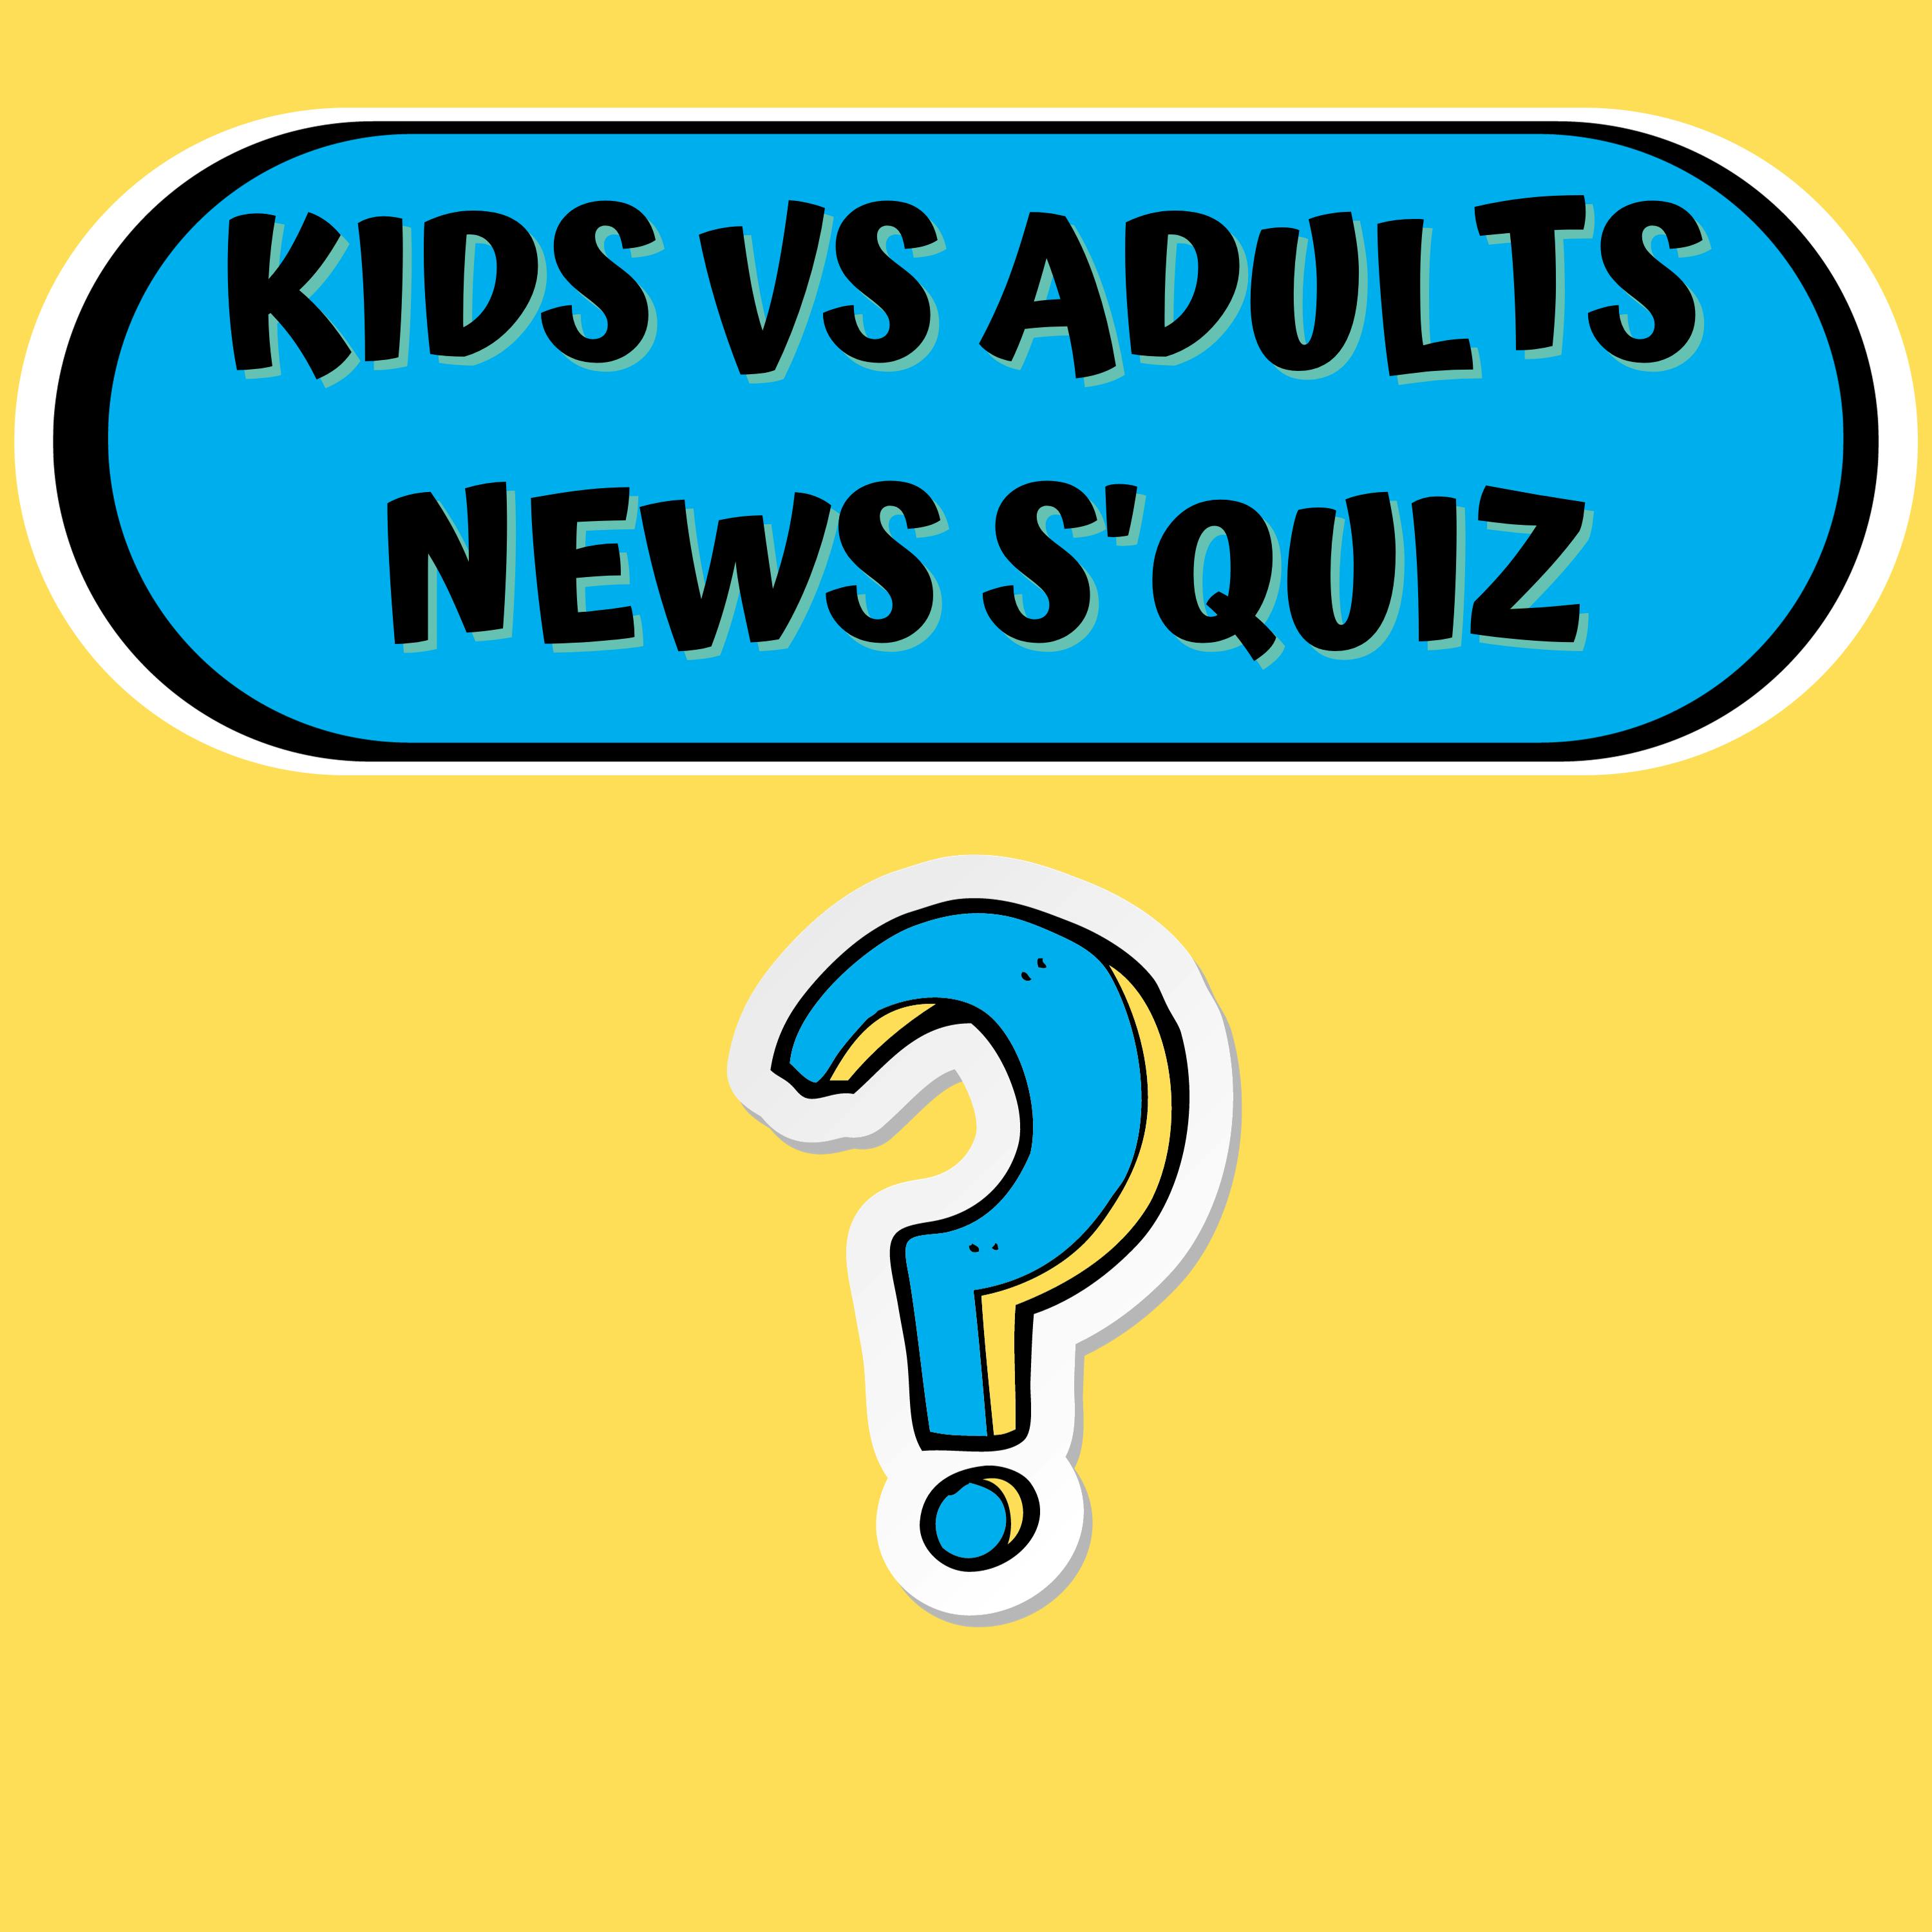 Kids vs Adults Weekly News S’Quiz - Friday, December 8